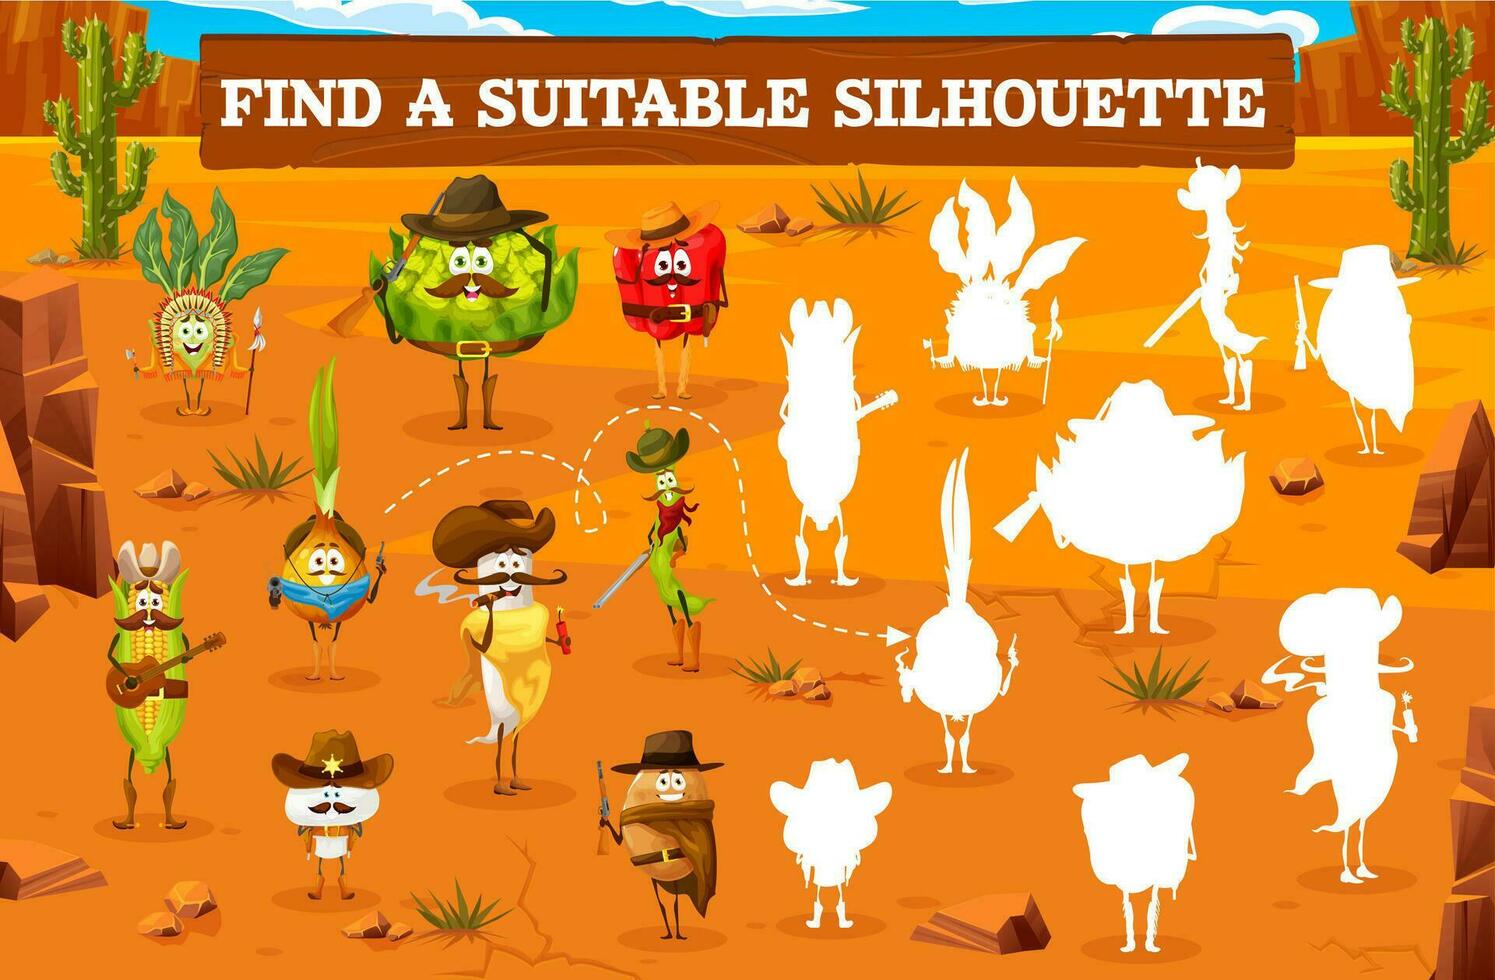 Find suitable silhouette game, cowboy vegetables vector